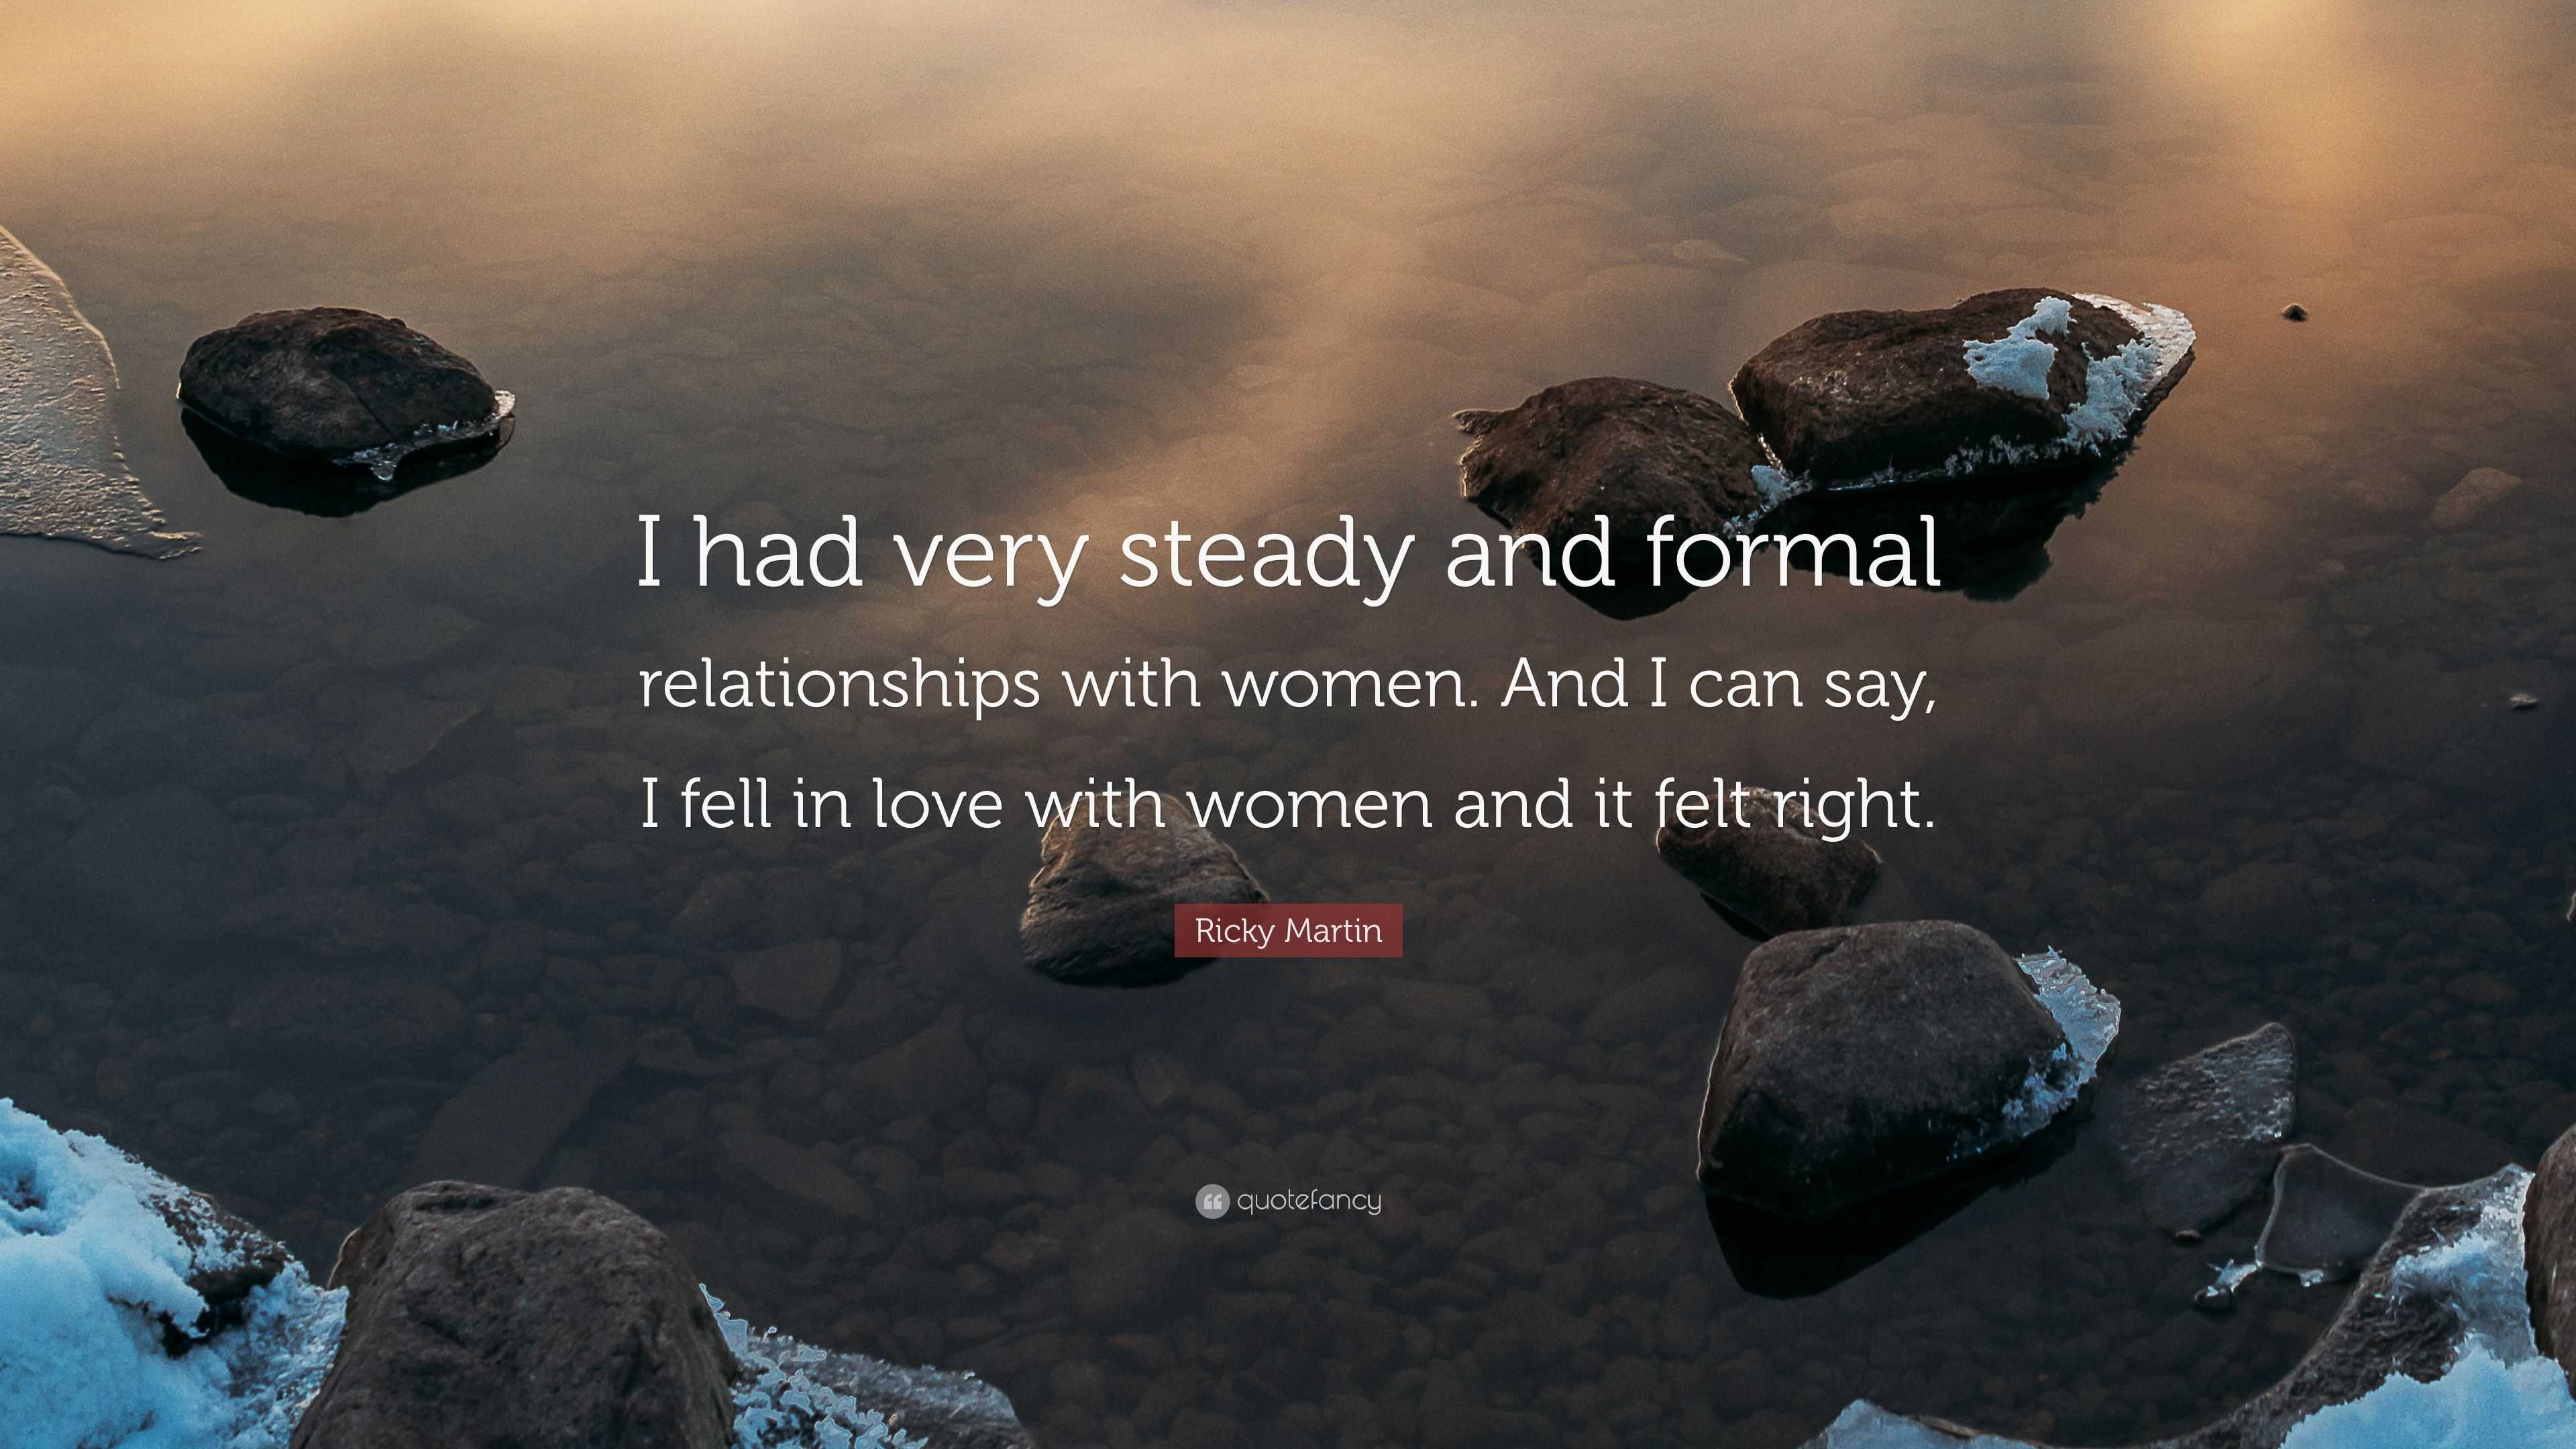 quotes about relationships for women